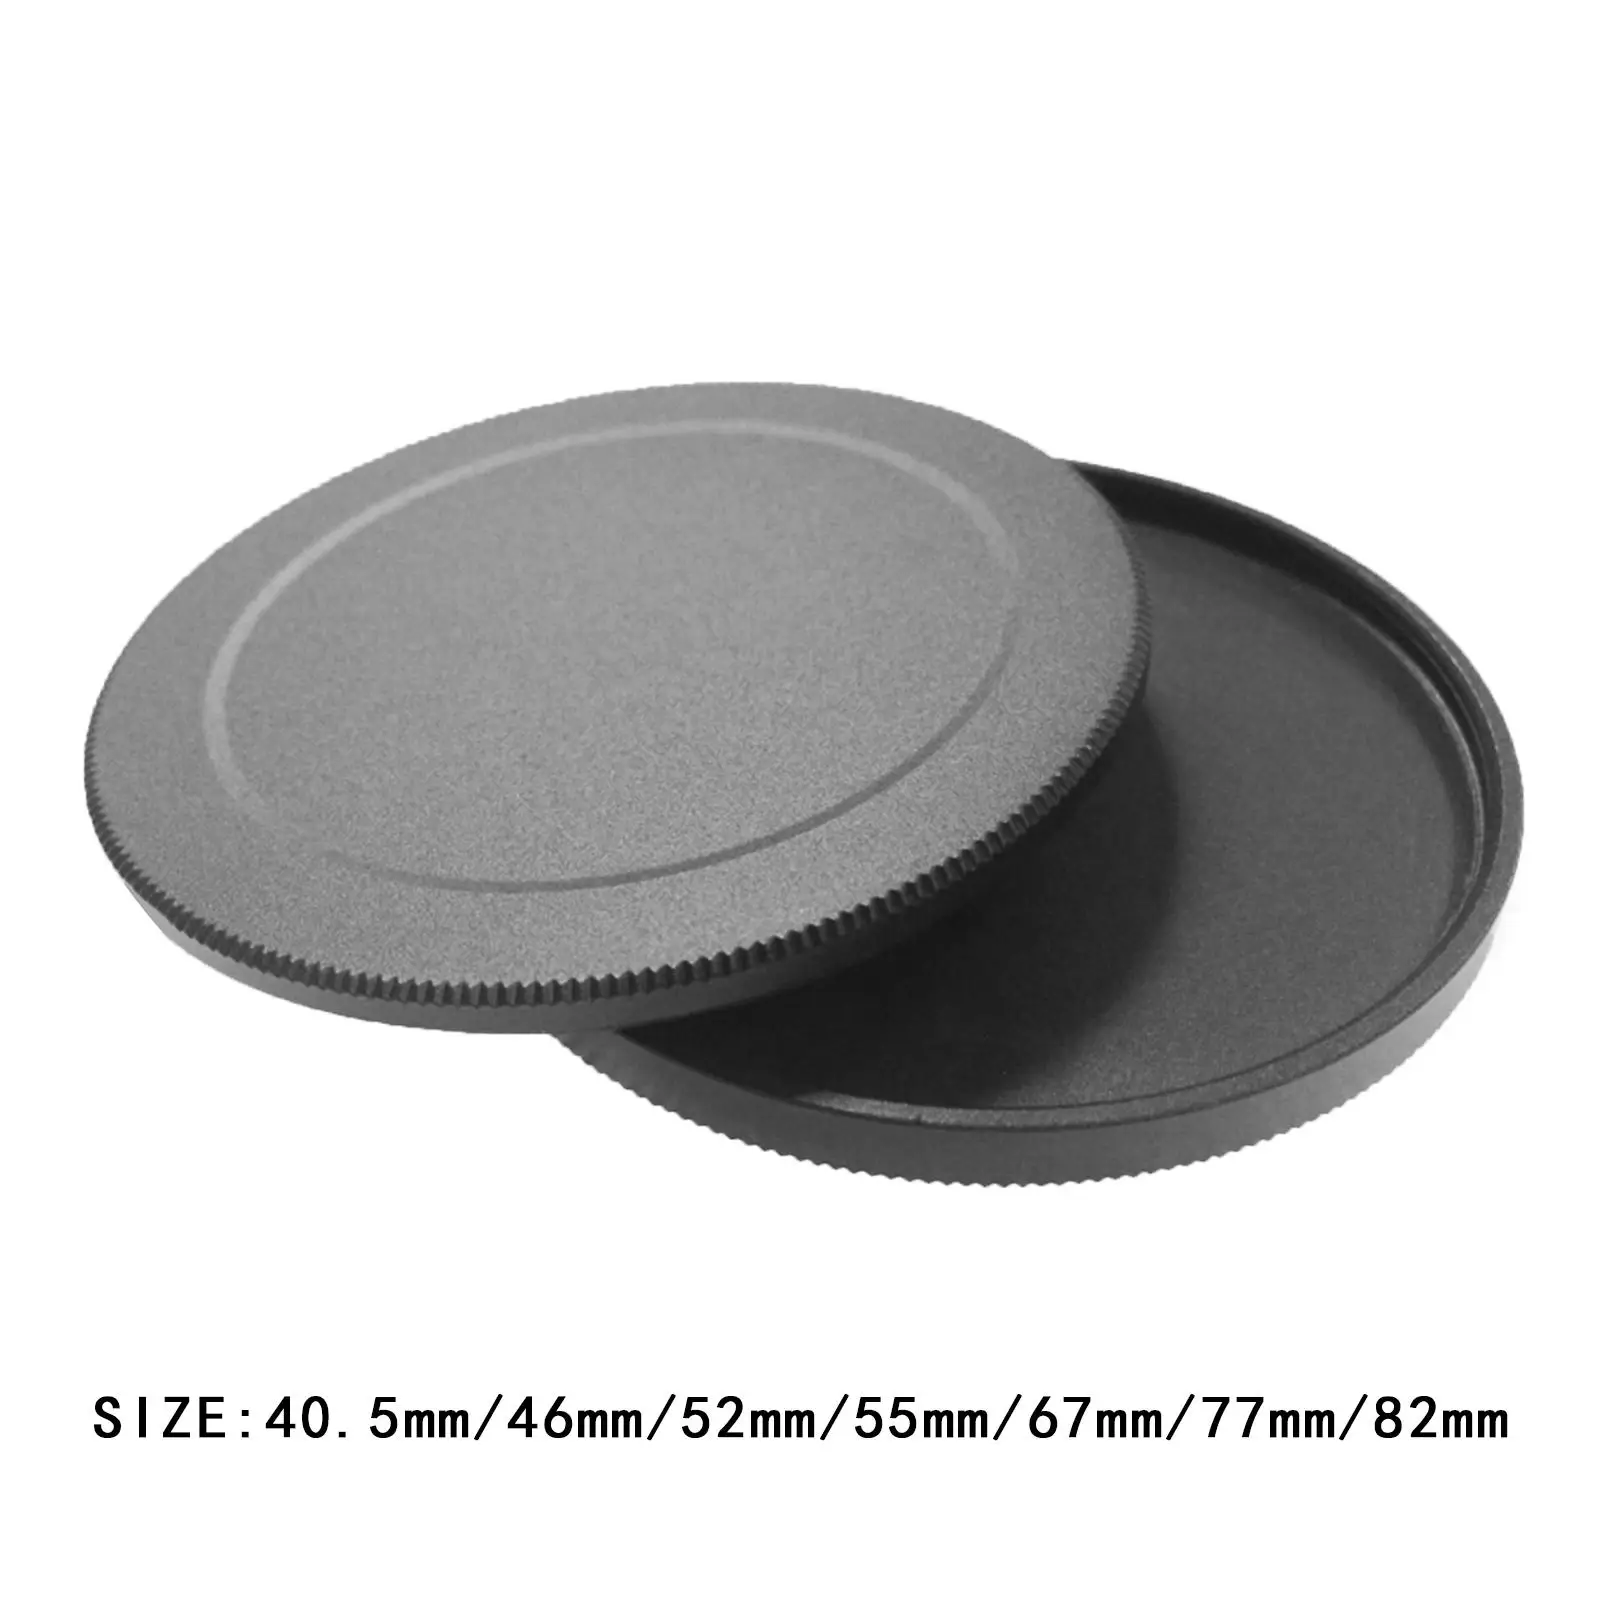 2 Pieces Screw in Lens Filter Stack Caps Anti Scratched Slim Filters Case Front Rear Case for Lens Filter Metal Box Storage Caps